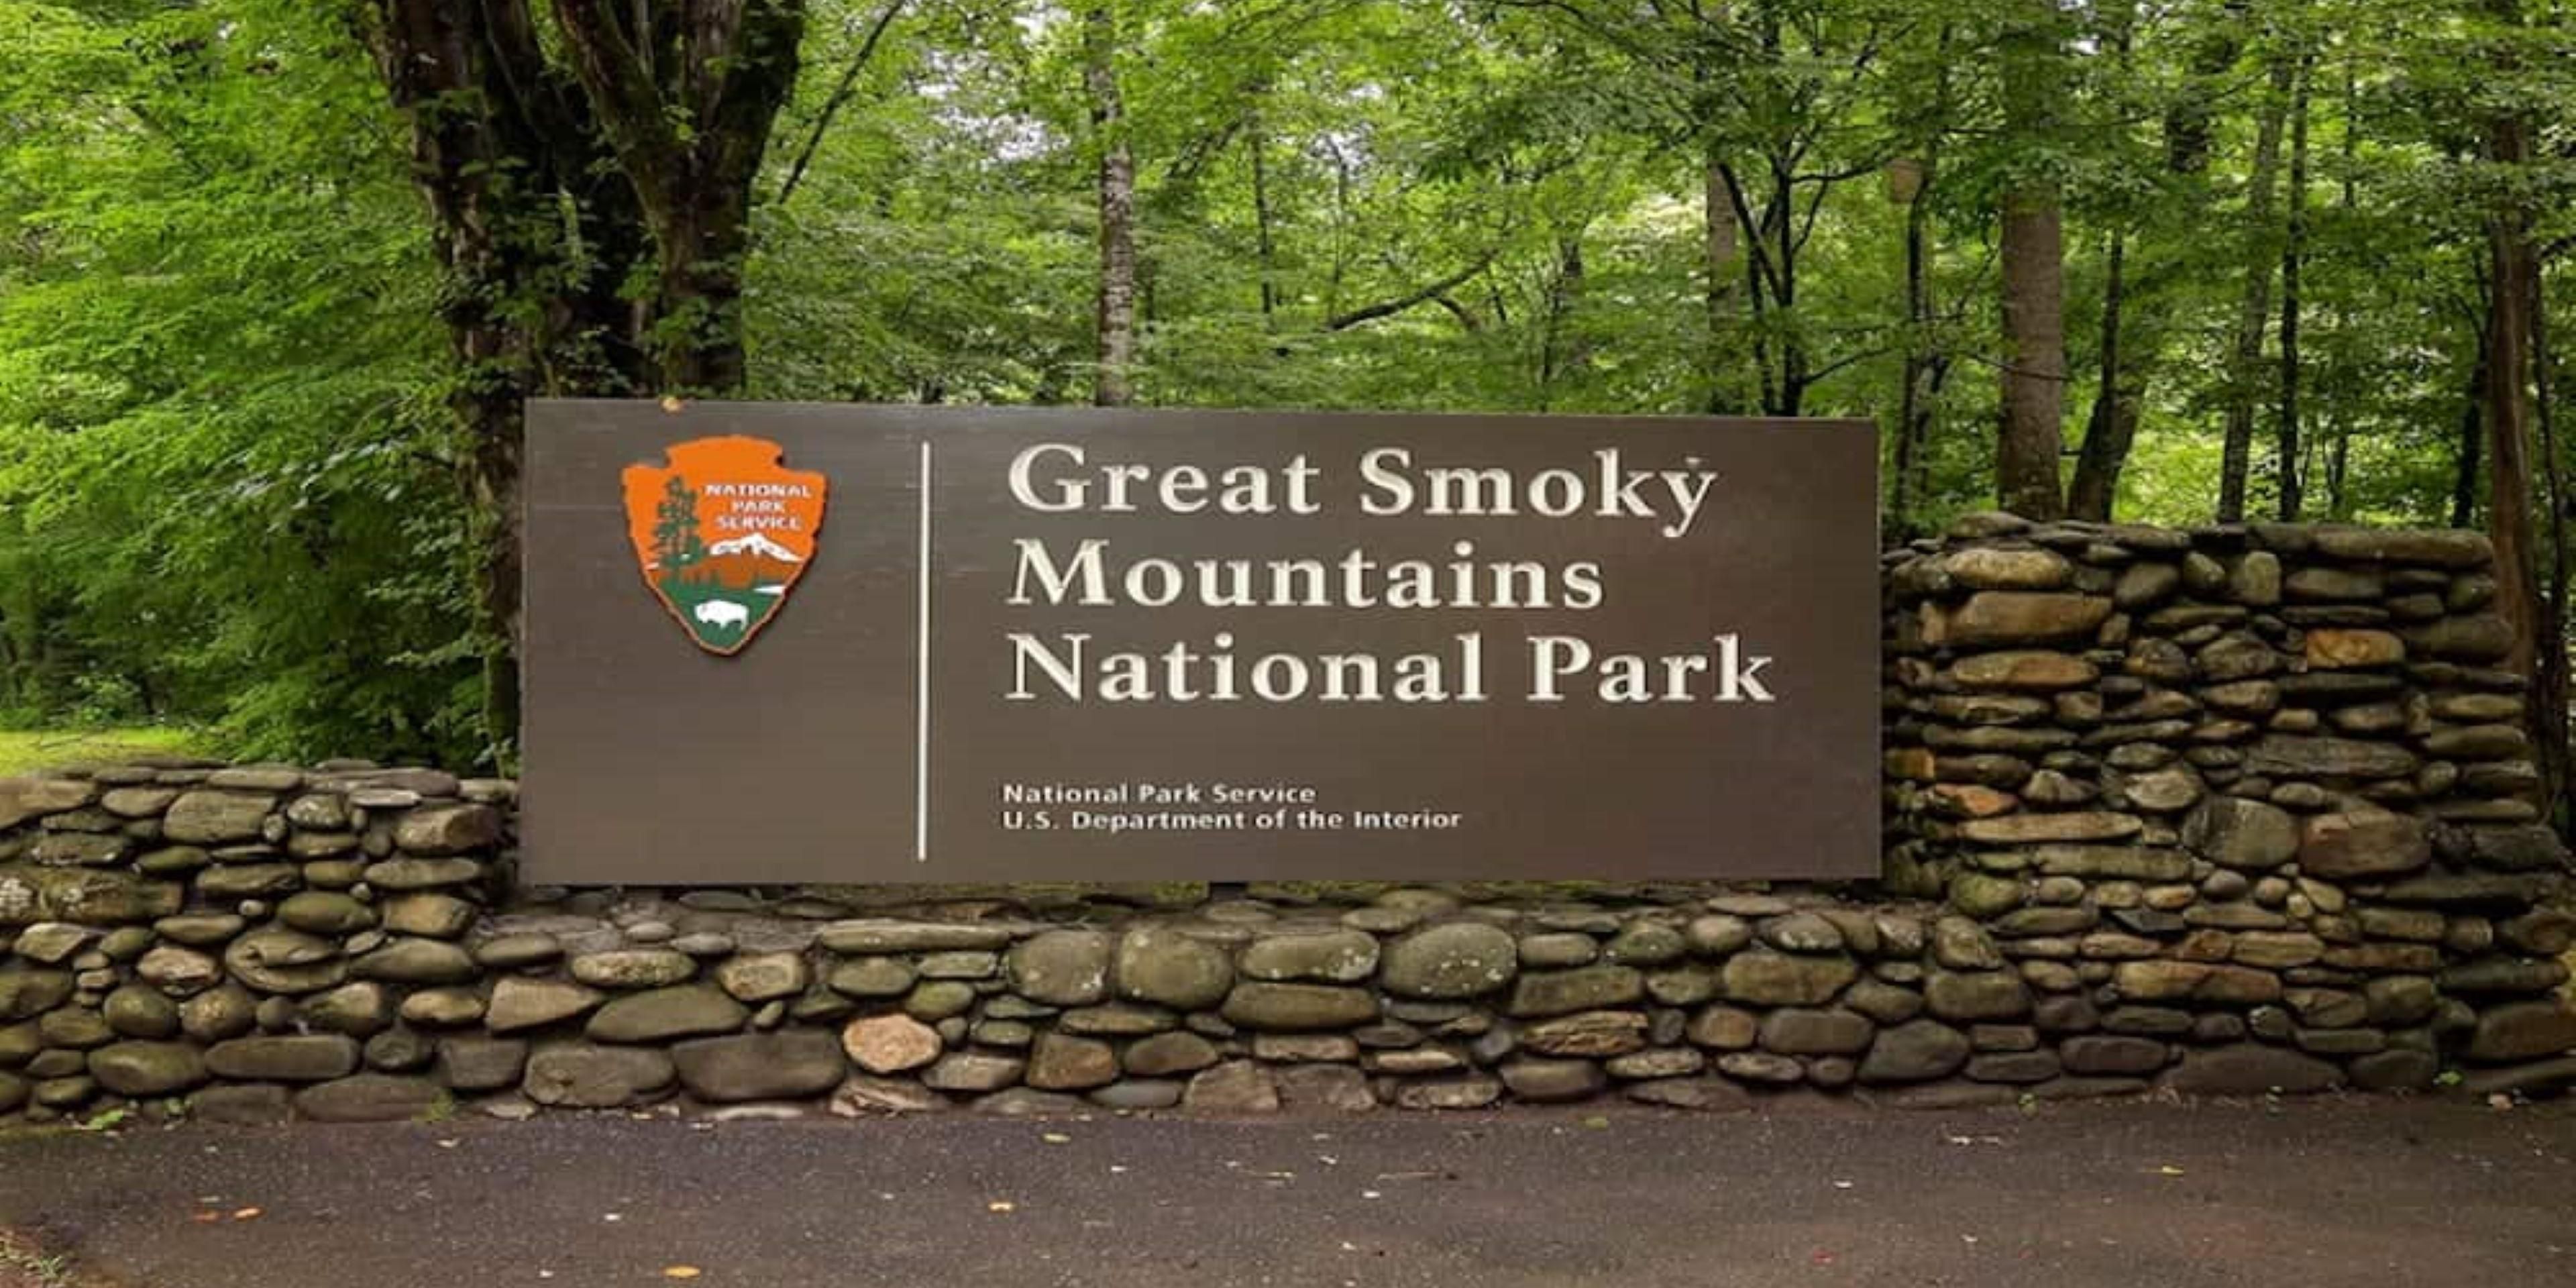 We are just a short drive  from the beautiful Smoky Mountain National Park.  Stop at the Sugarlands Welcome Center for a map that will help you to locate hiking trails, picnic tables, waterfalls, and the best places to see wildlife.  Our hotel is located 3 to 5 miles of most Pigeon Forge attractions including Dollywood & Splash Country.